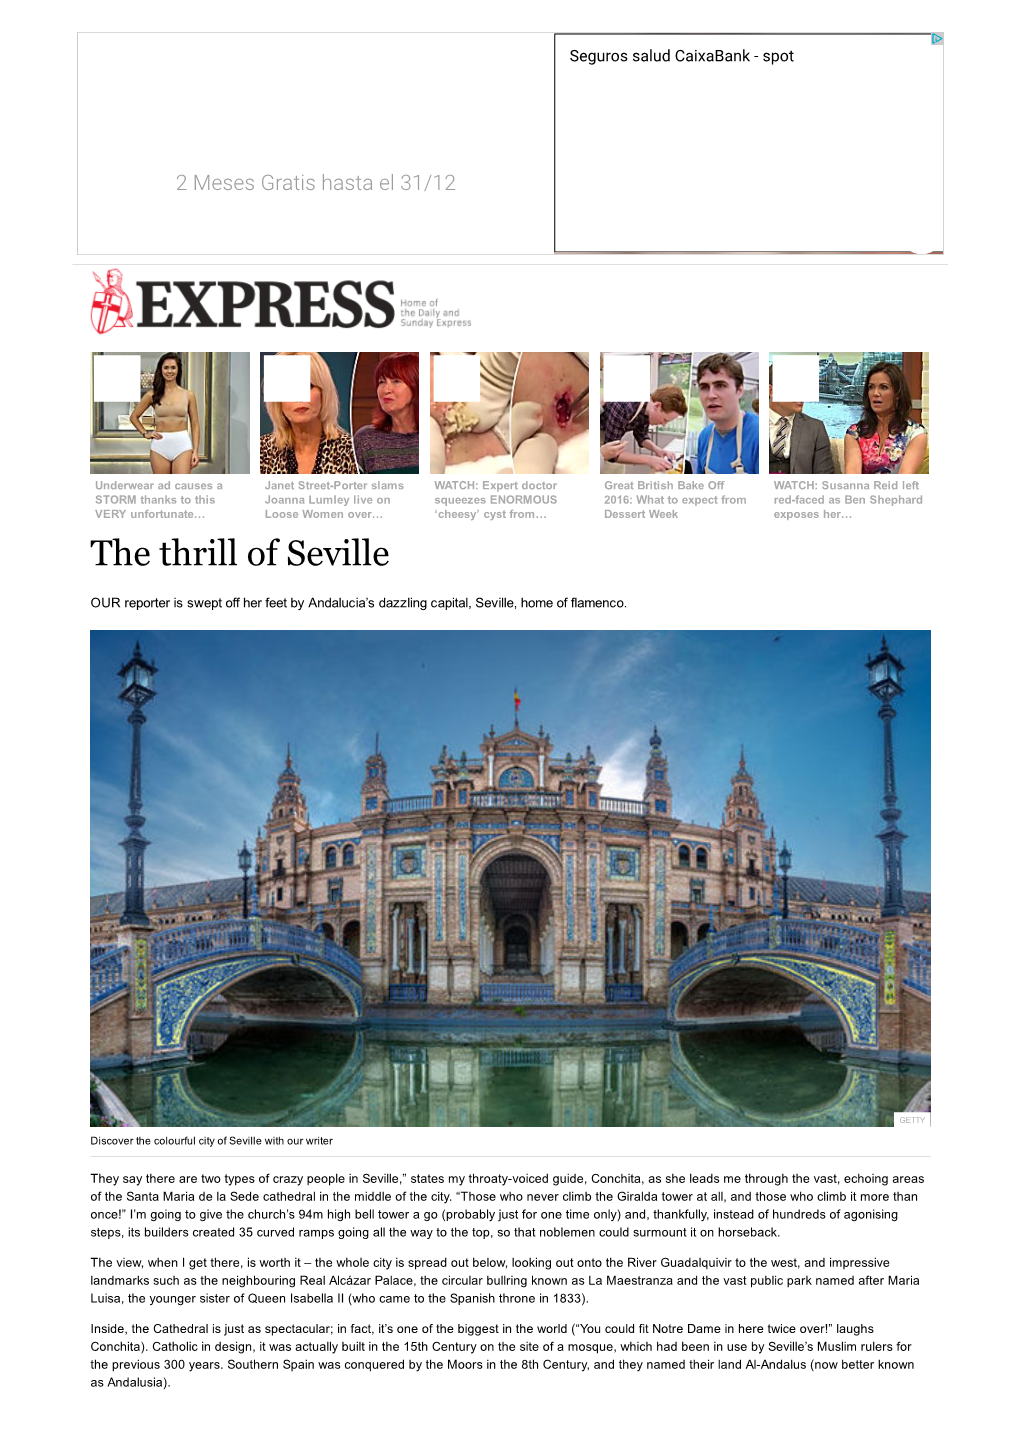 The Thrill of Seville